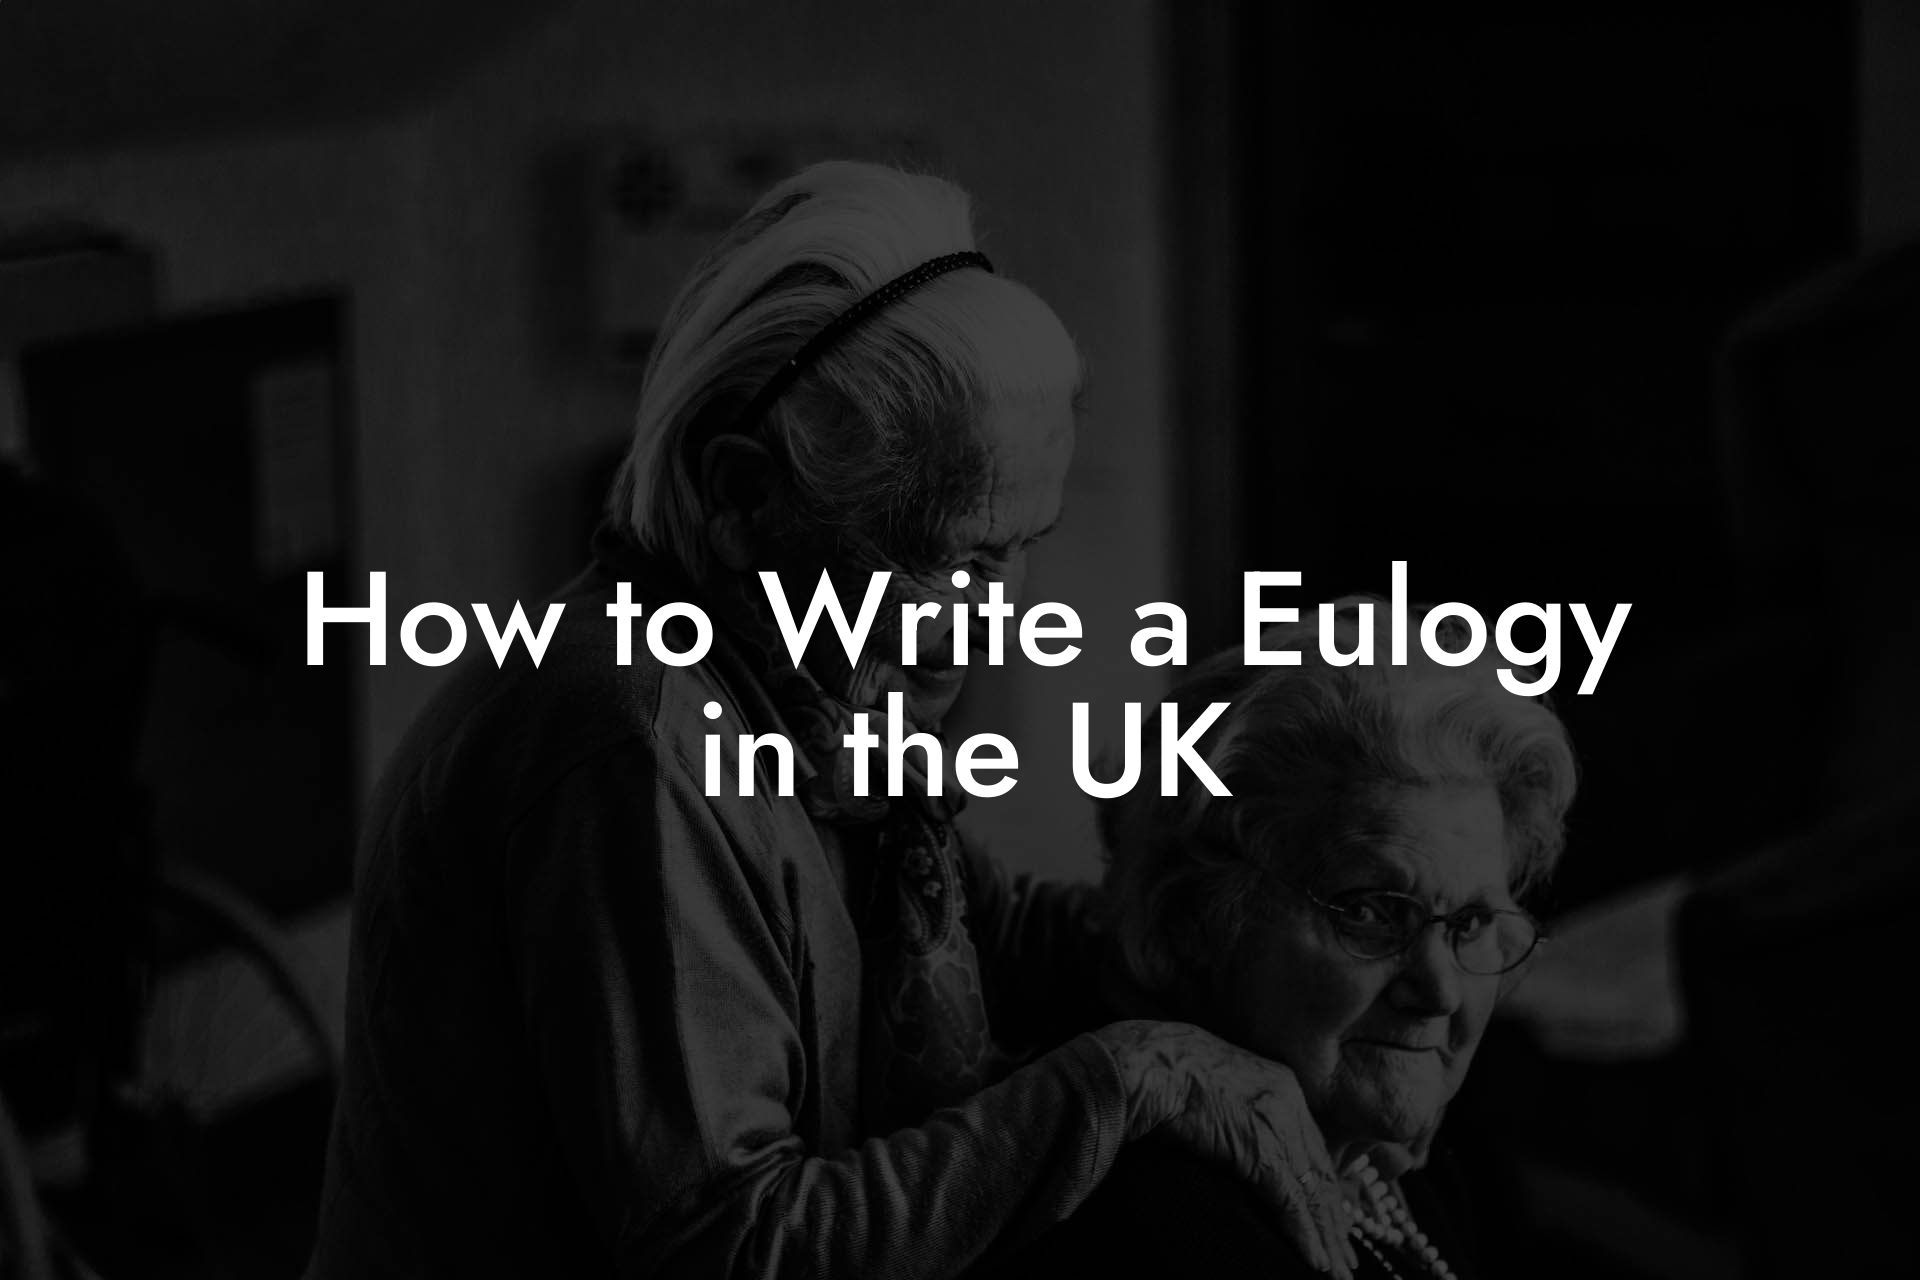 How to Write a Eulogy in the UK